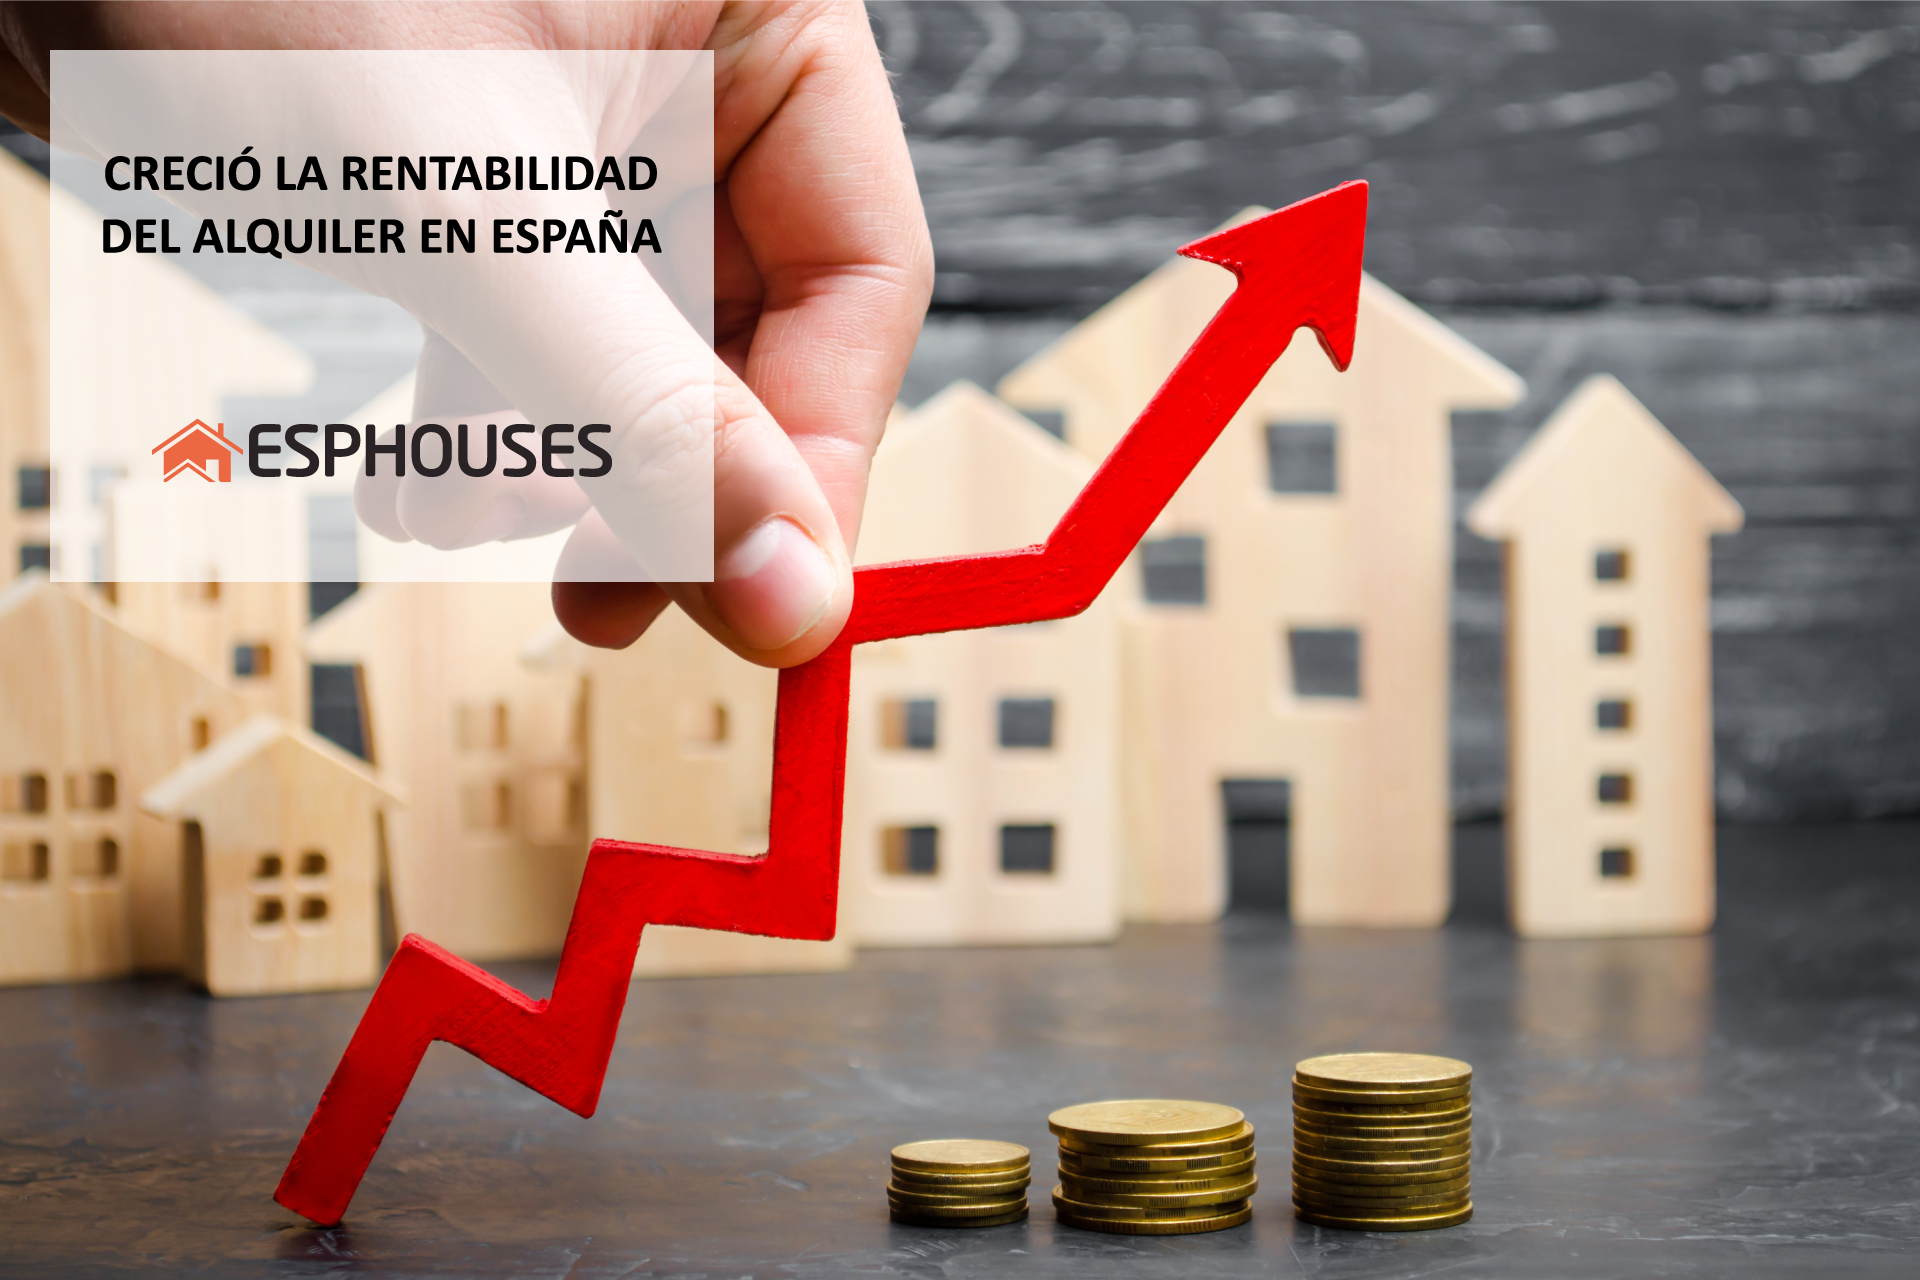 Rental profitability in Spain grew during the first quarter of the year